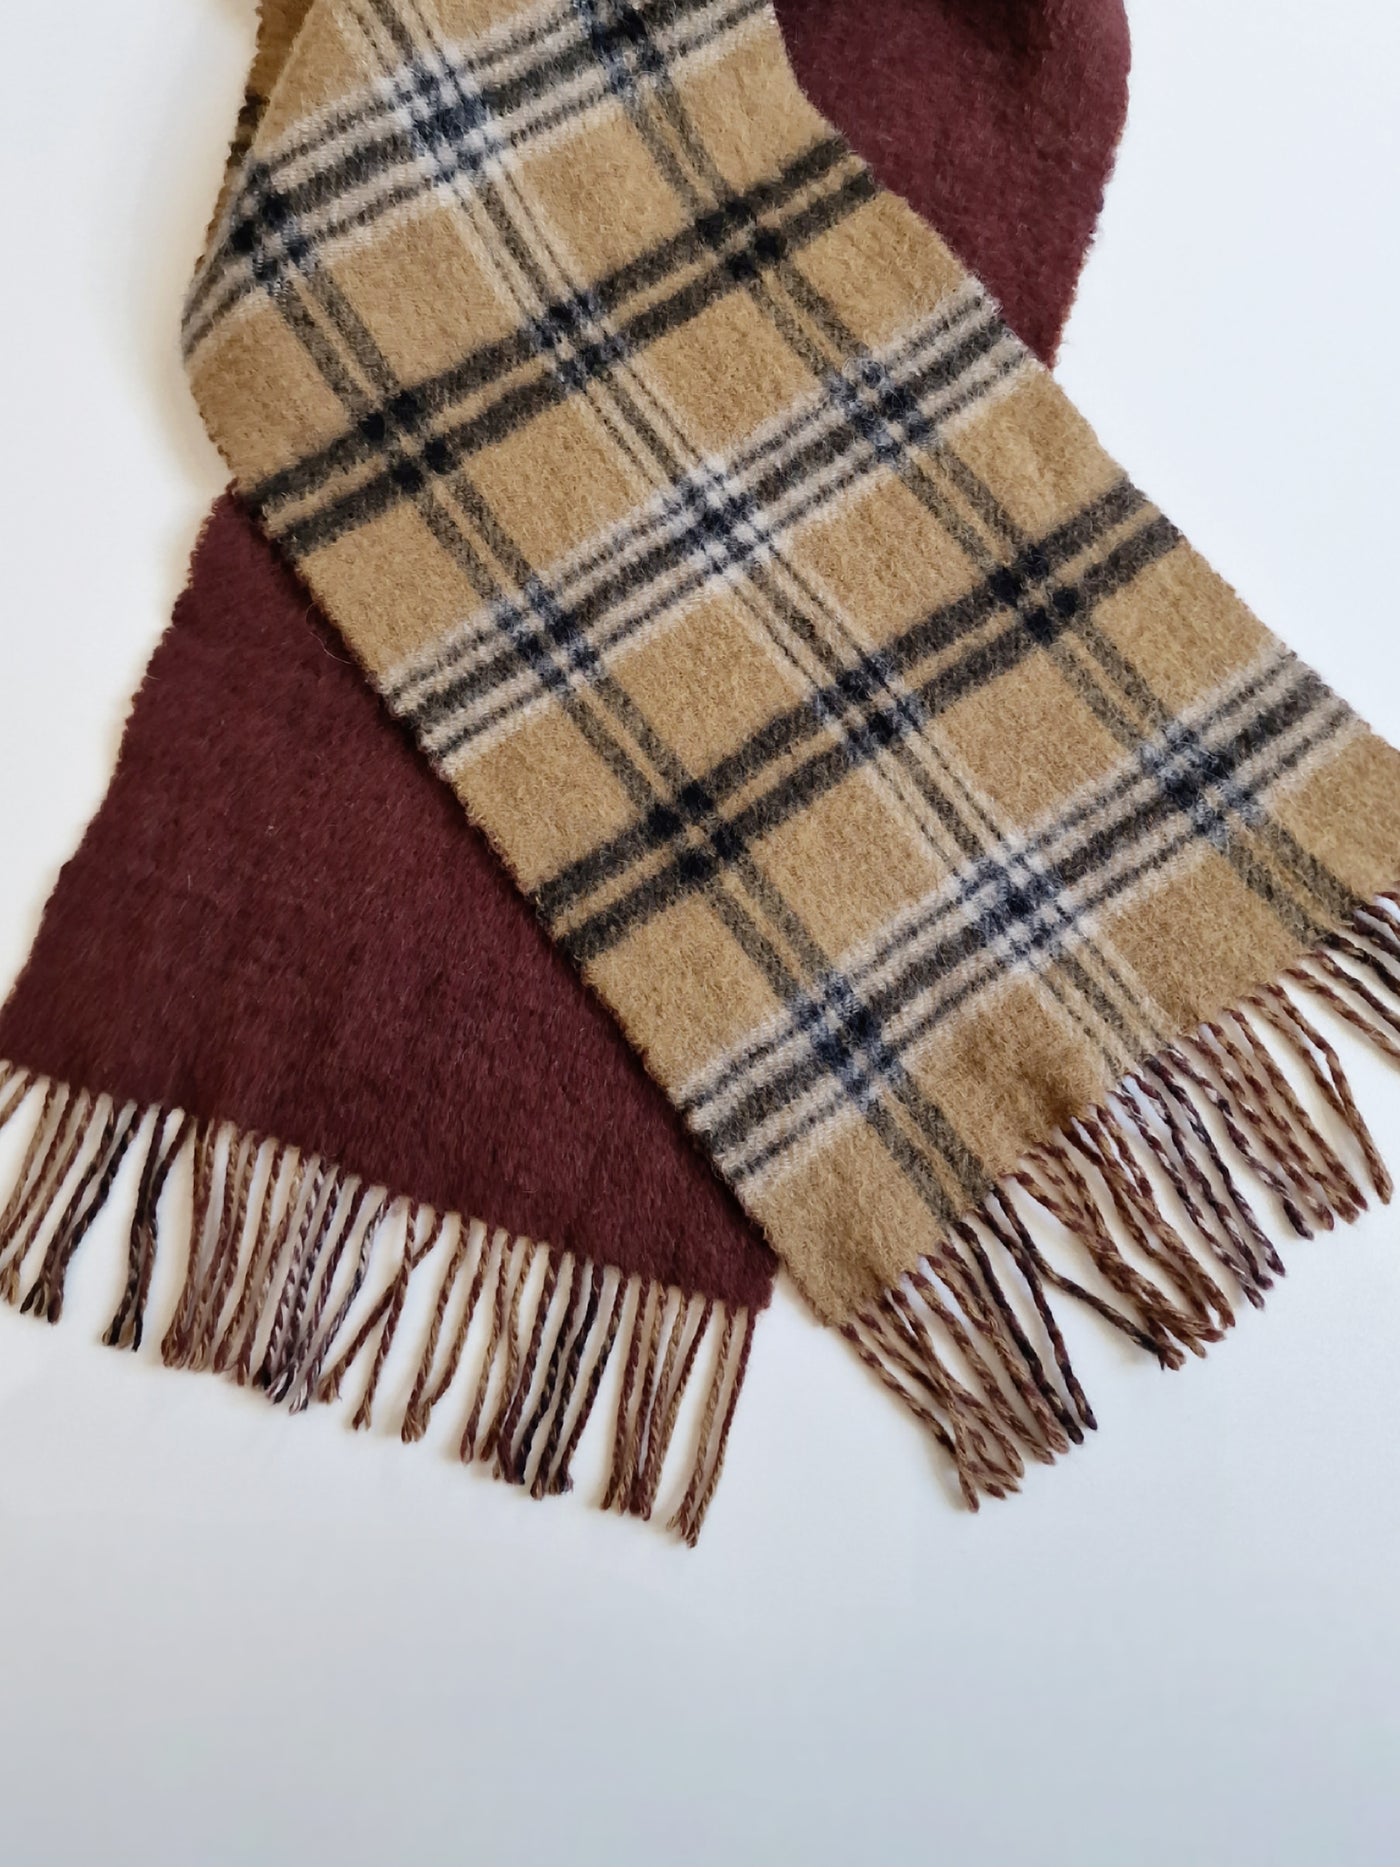 Vintage Burgundy and Camel Checked Wool Scarf